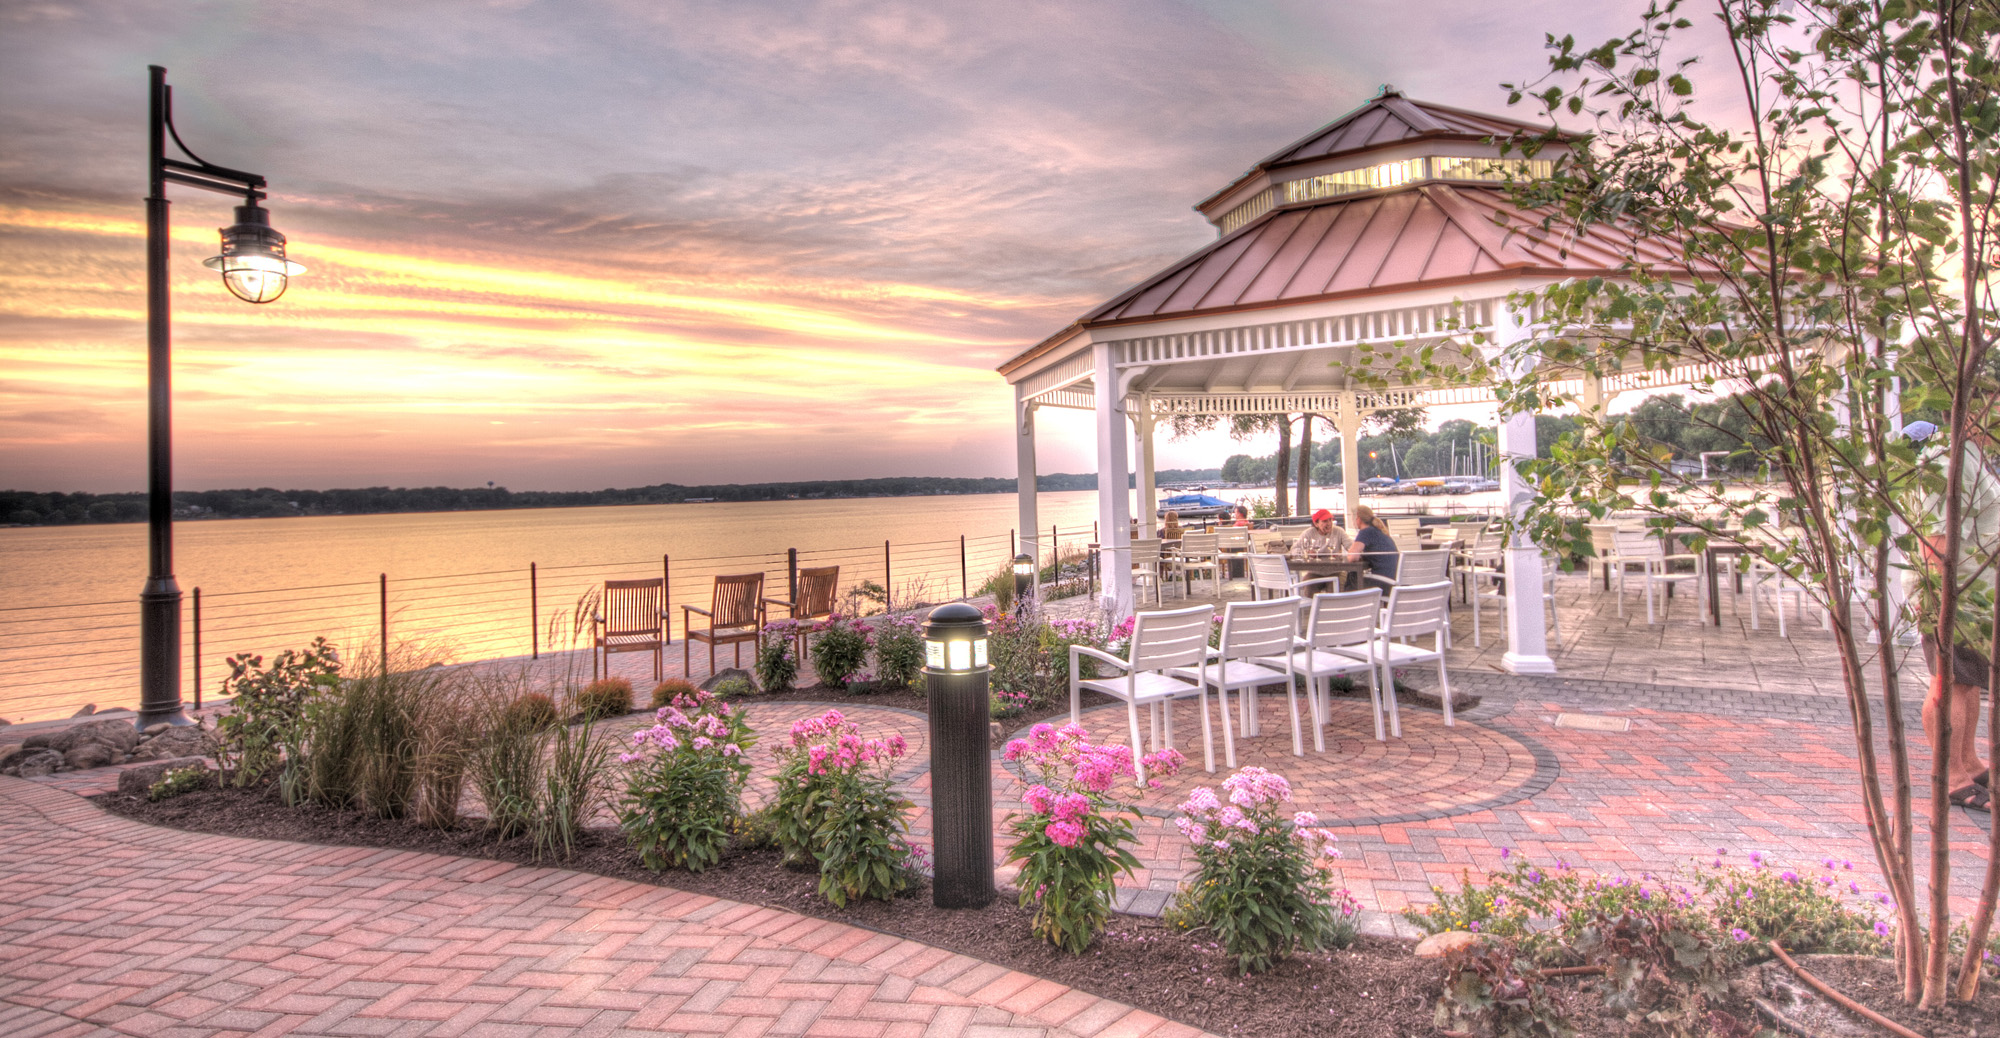 exterior patio with gazebo overlooking the river at sunset